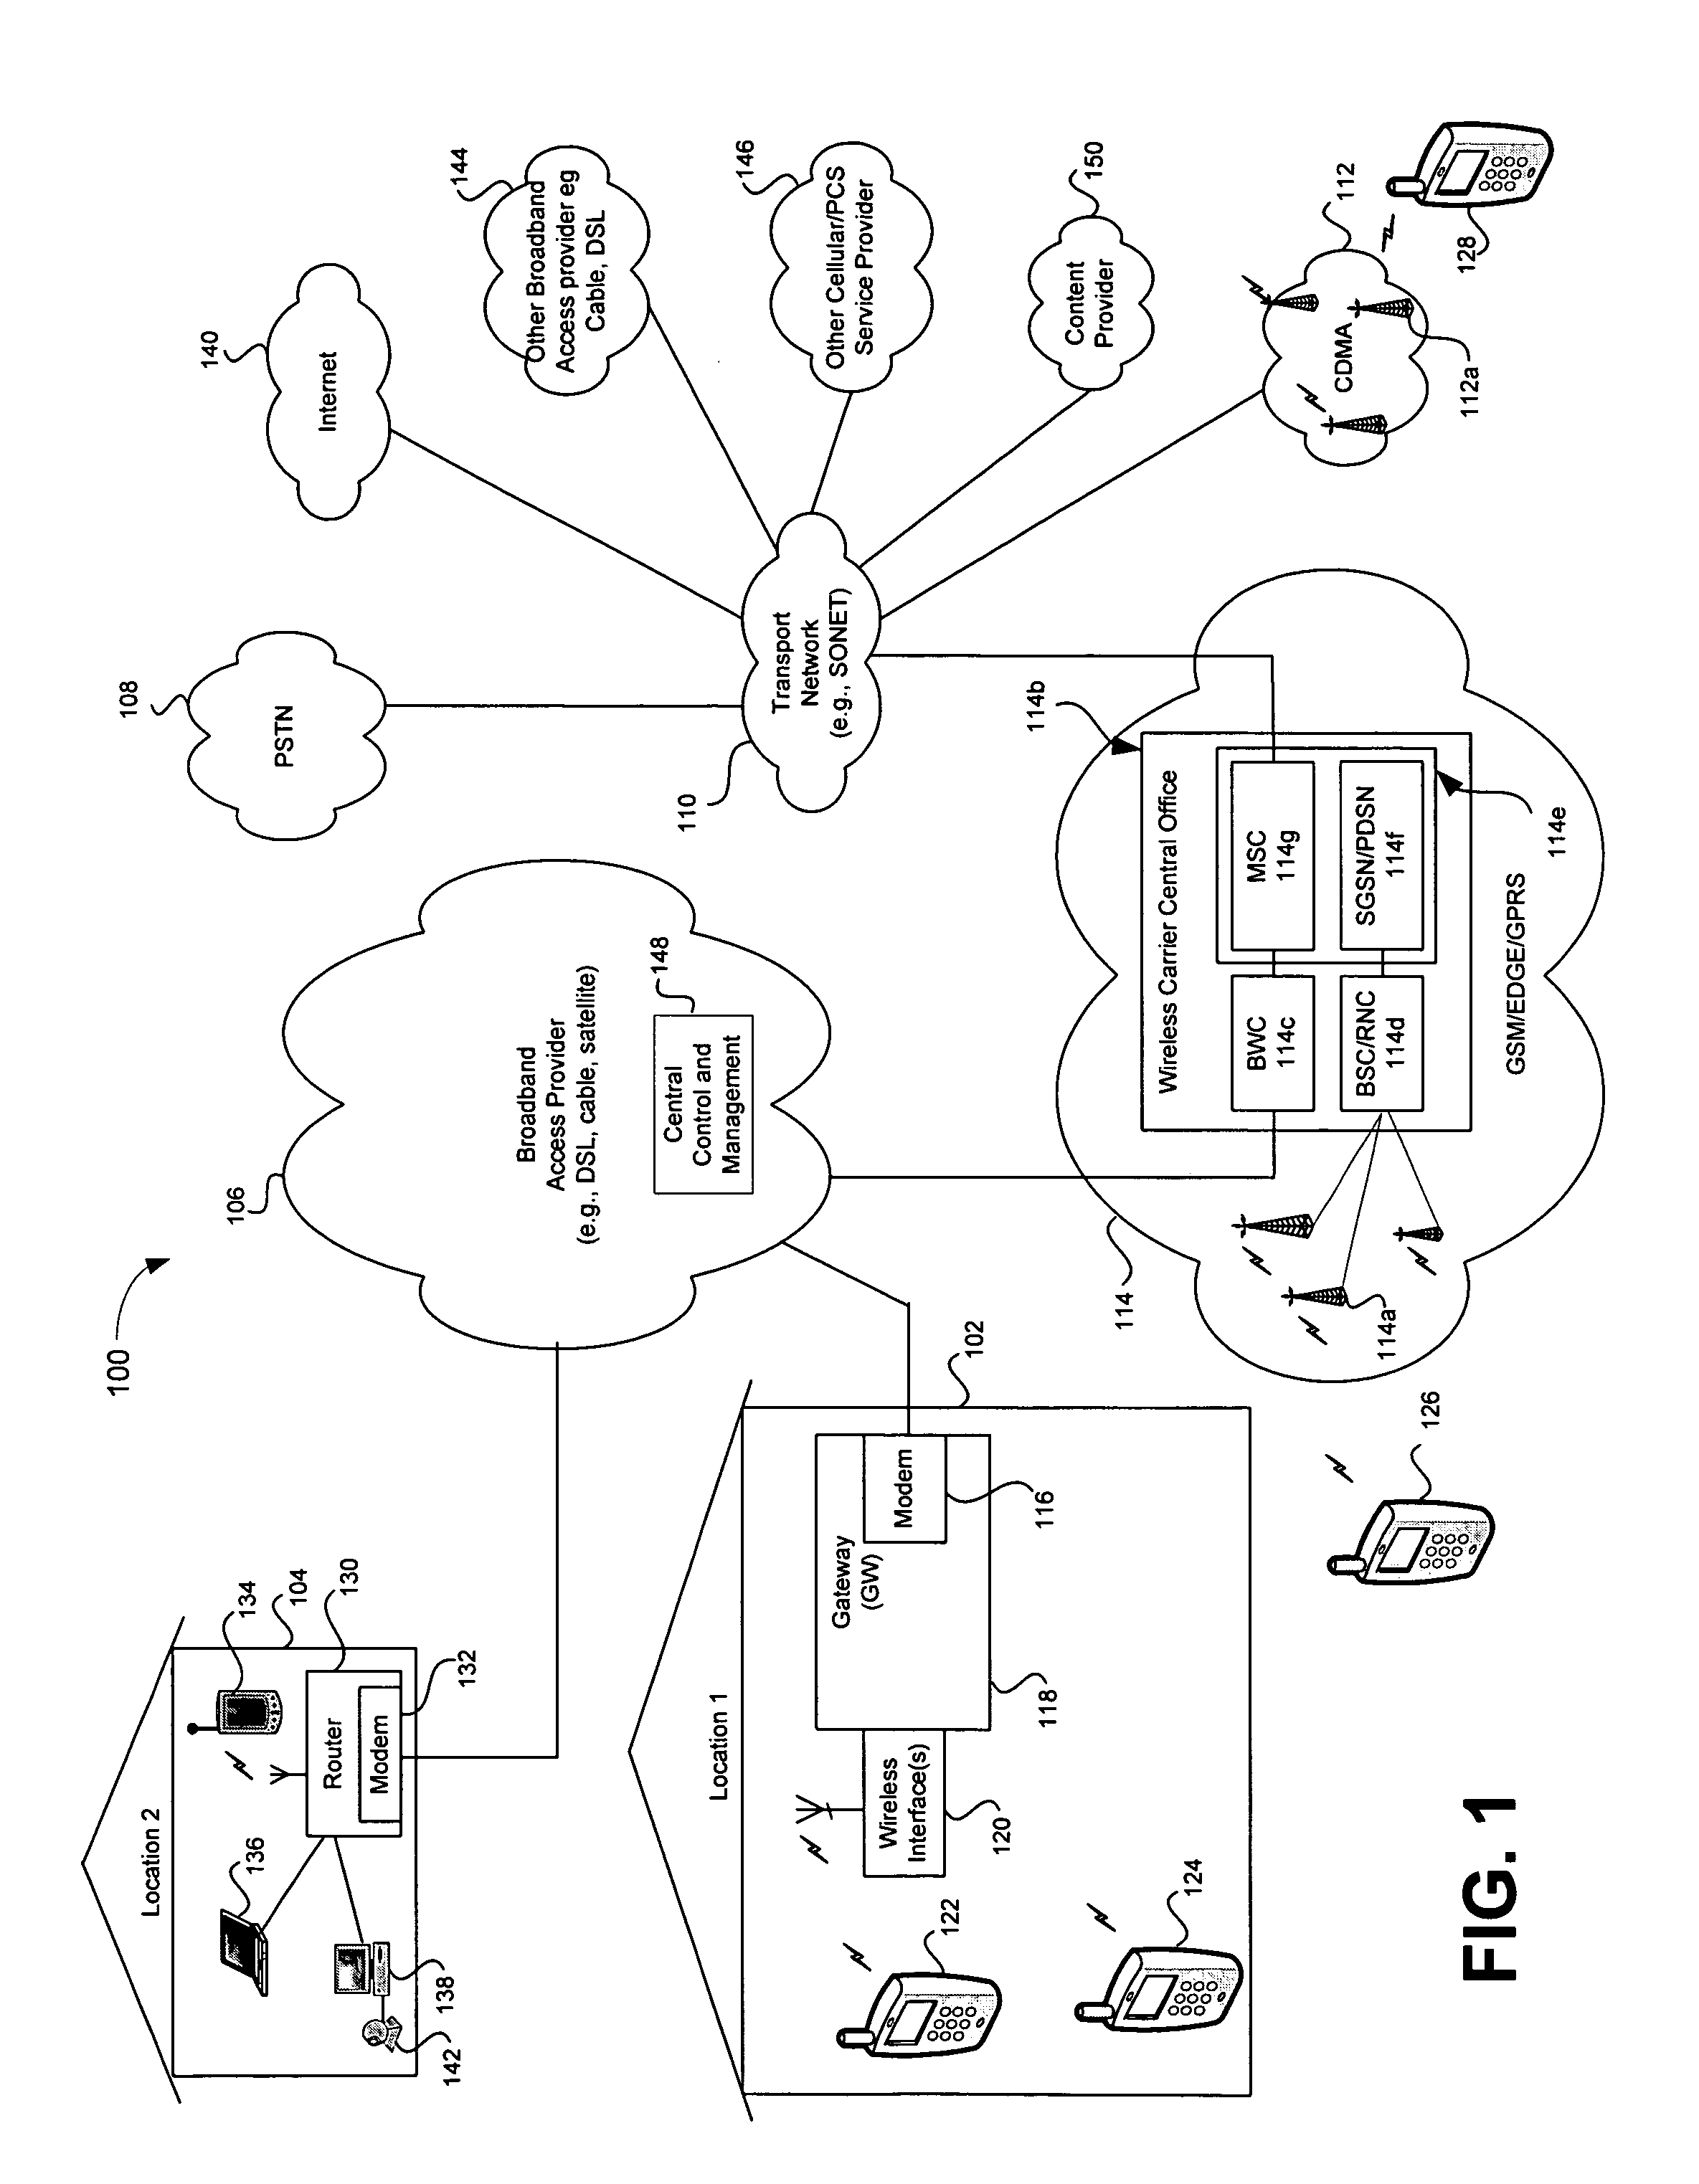 Handoff of a multimedia call session using background network scanning